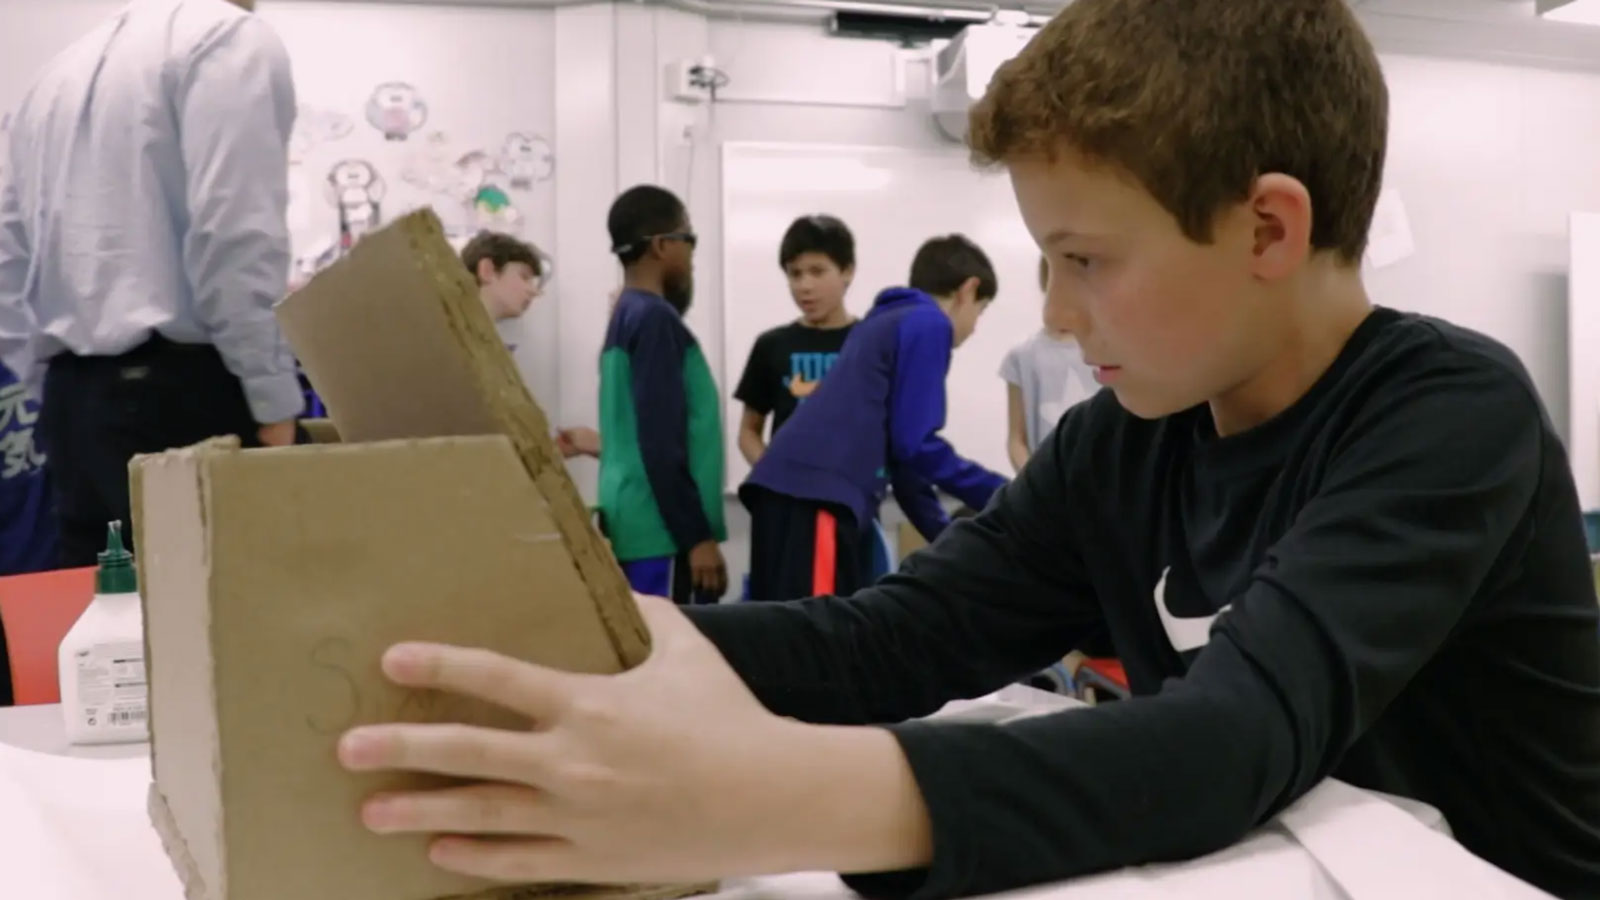 A boy makes a reading easel out of cardboard.